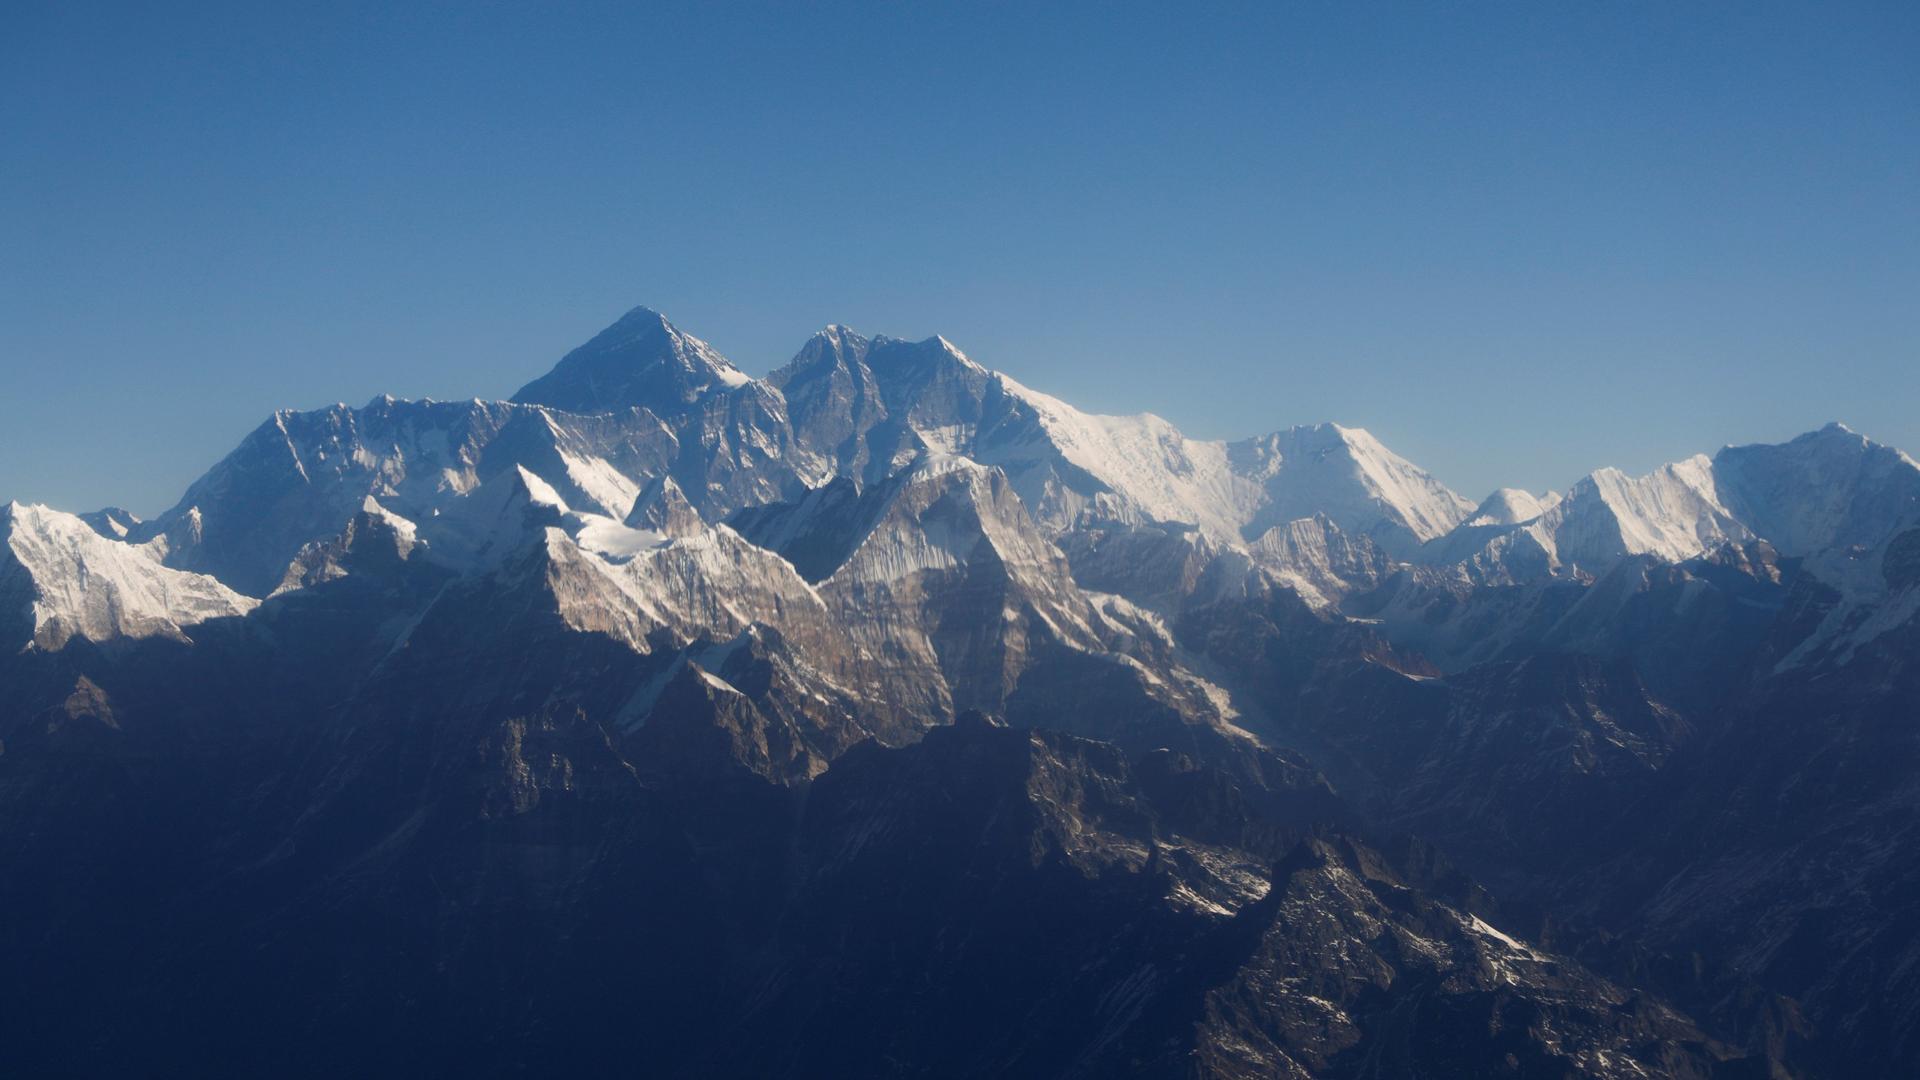 Mount Everest, the world highest peak, and other peaks of the Himalayan range are seen through an aircraft window during a mountain flight from Kathmandu, Nepal, Jan. 15, 2020.